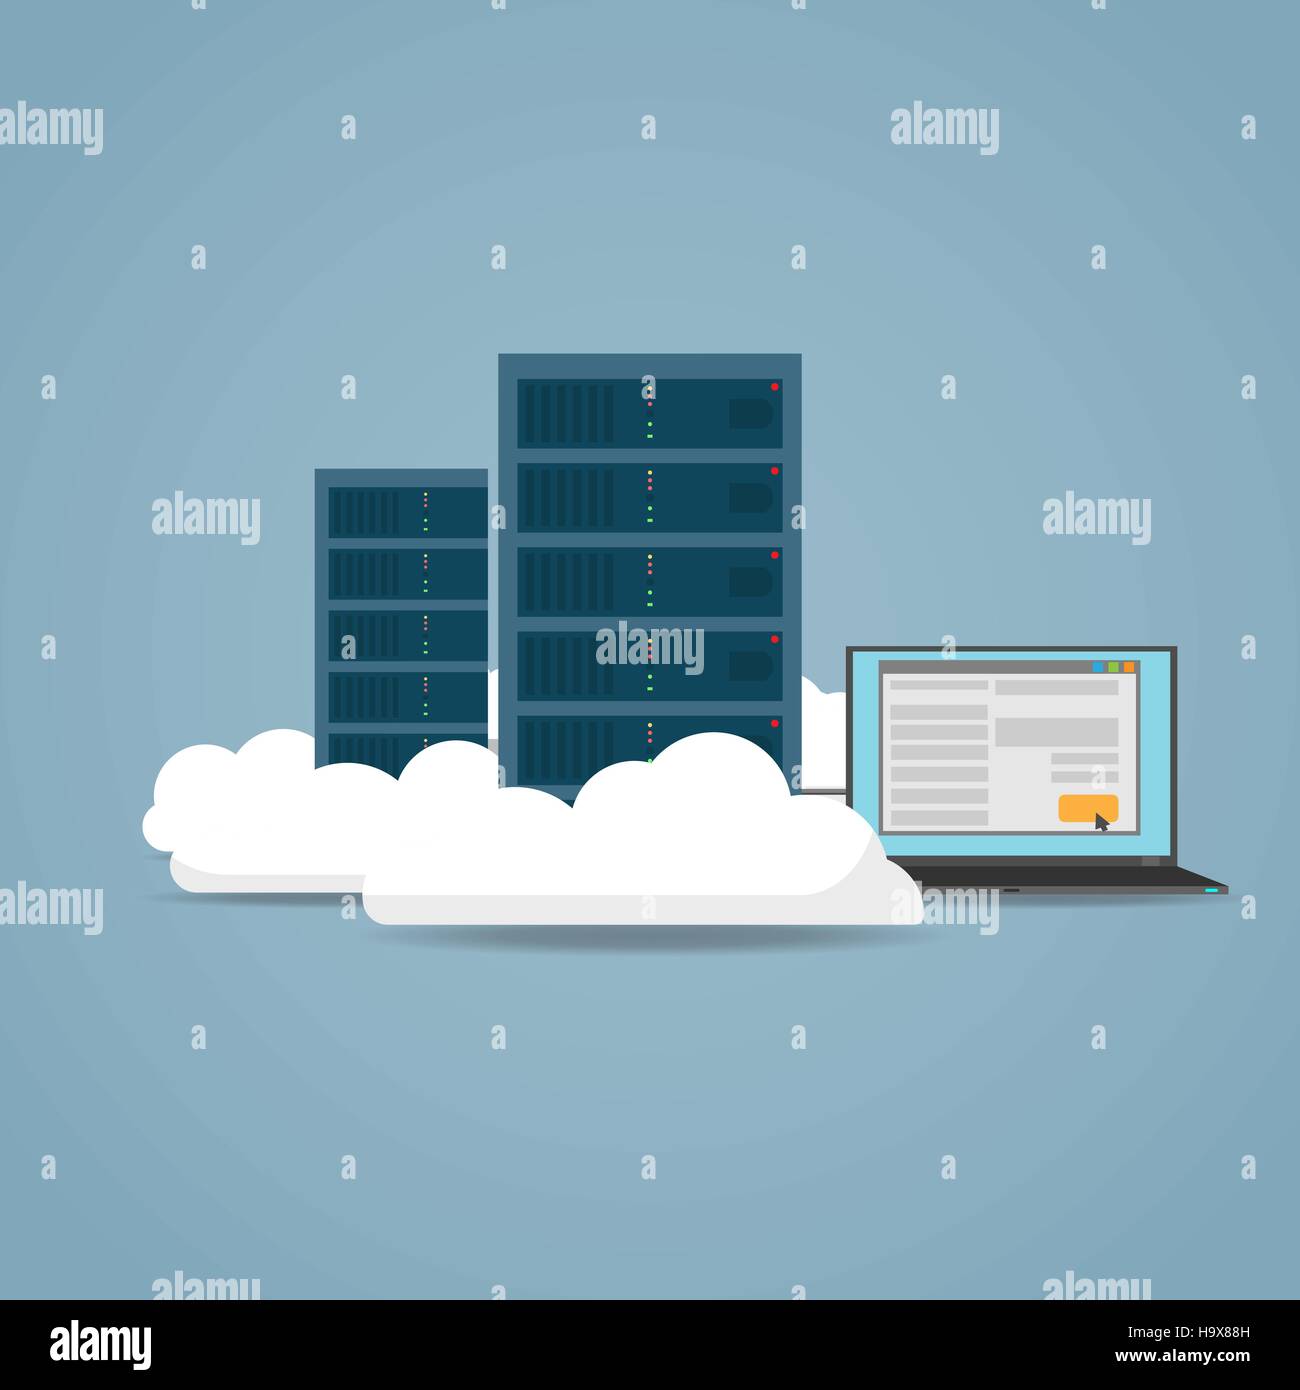 Cloud computer concept. Servers connected to laptop for settings. Stock Vector